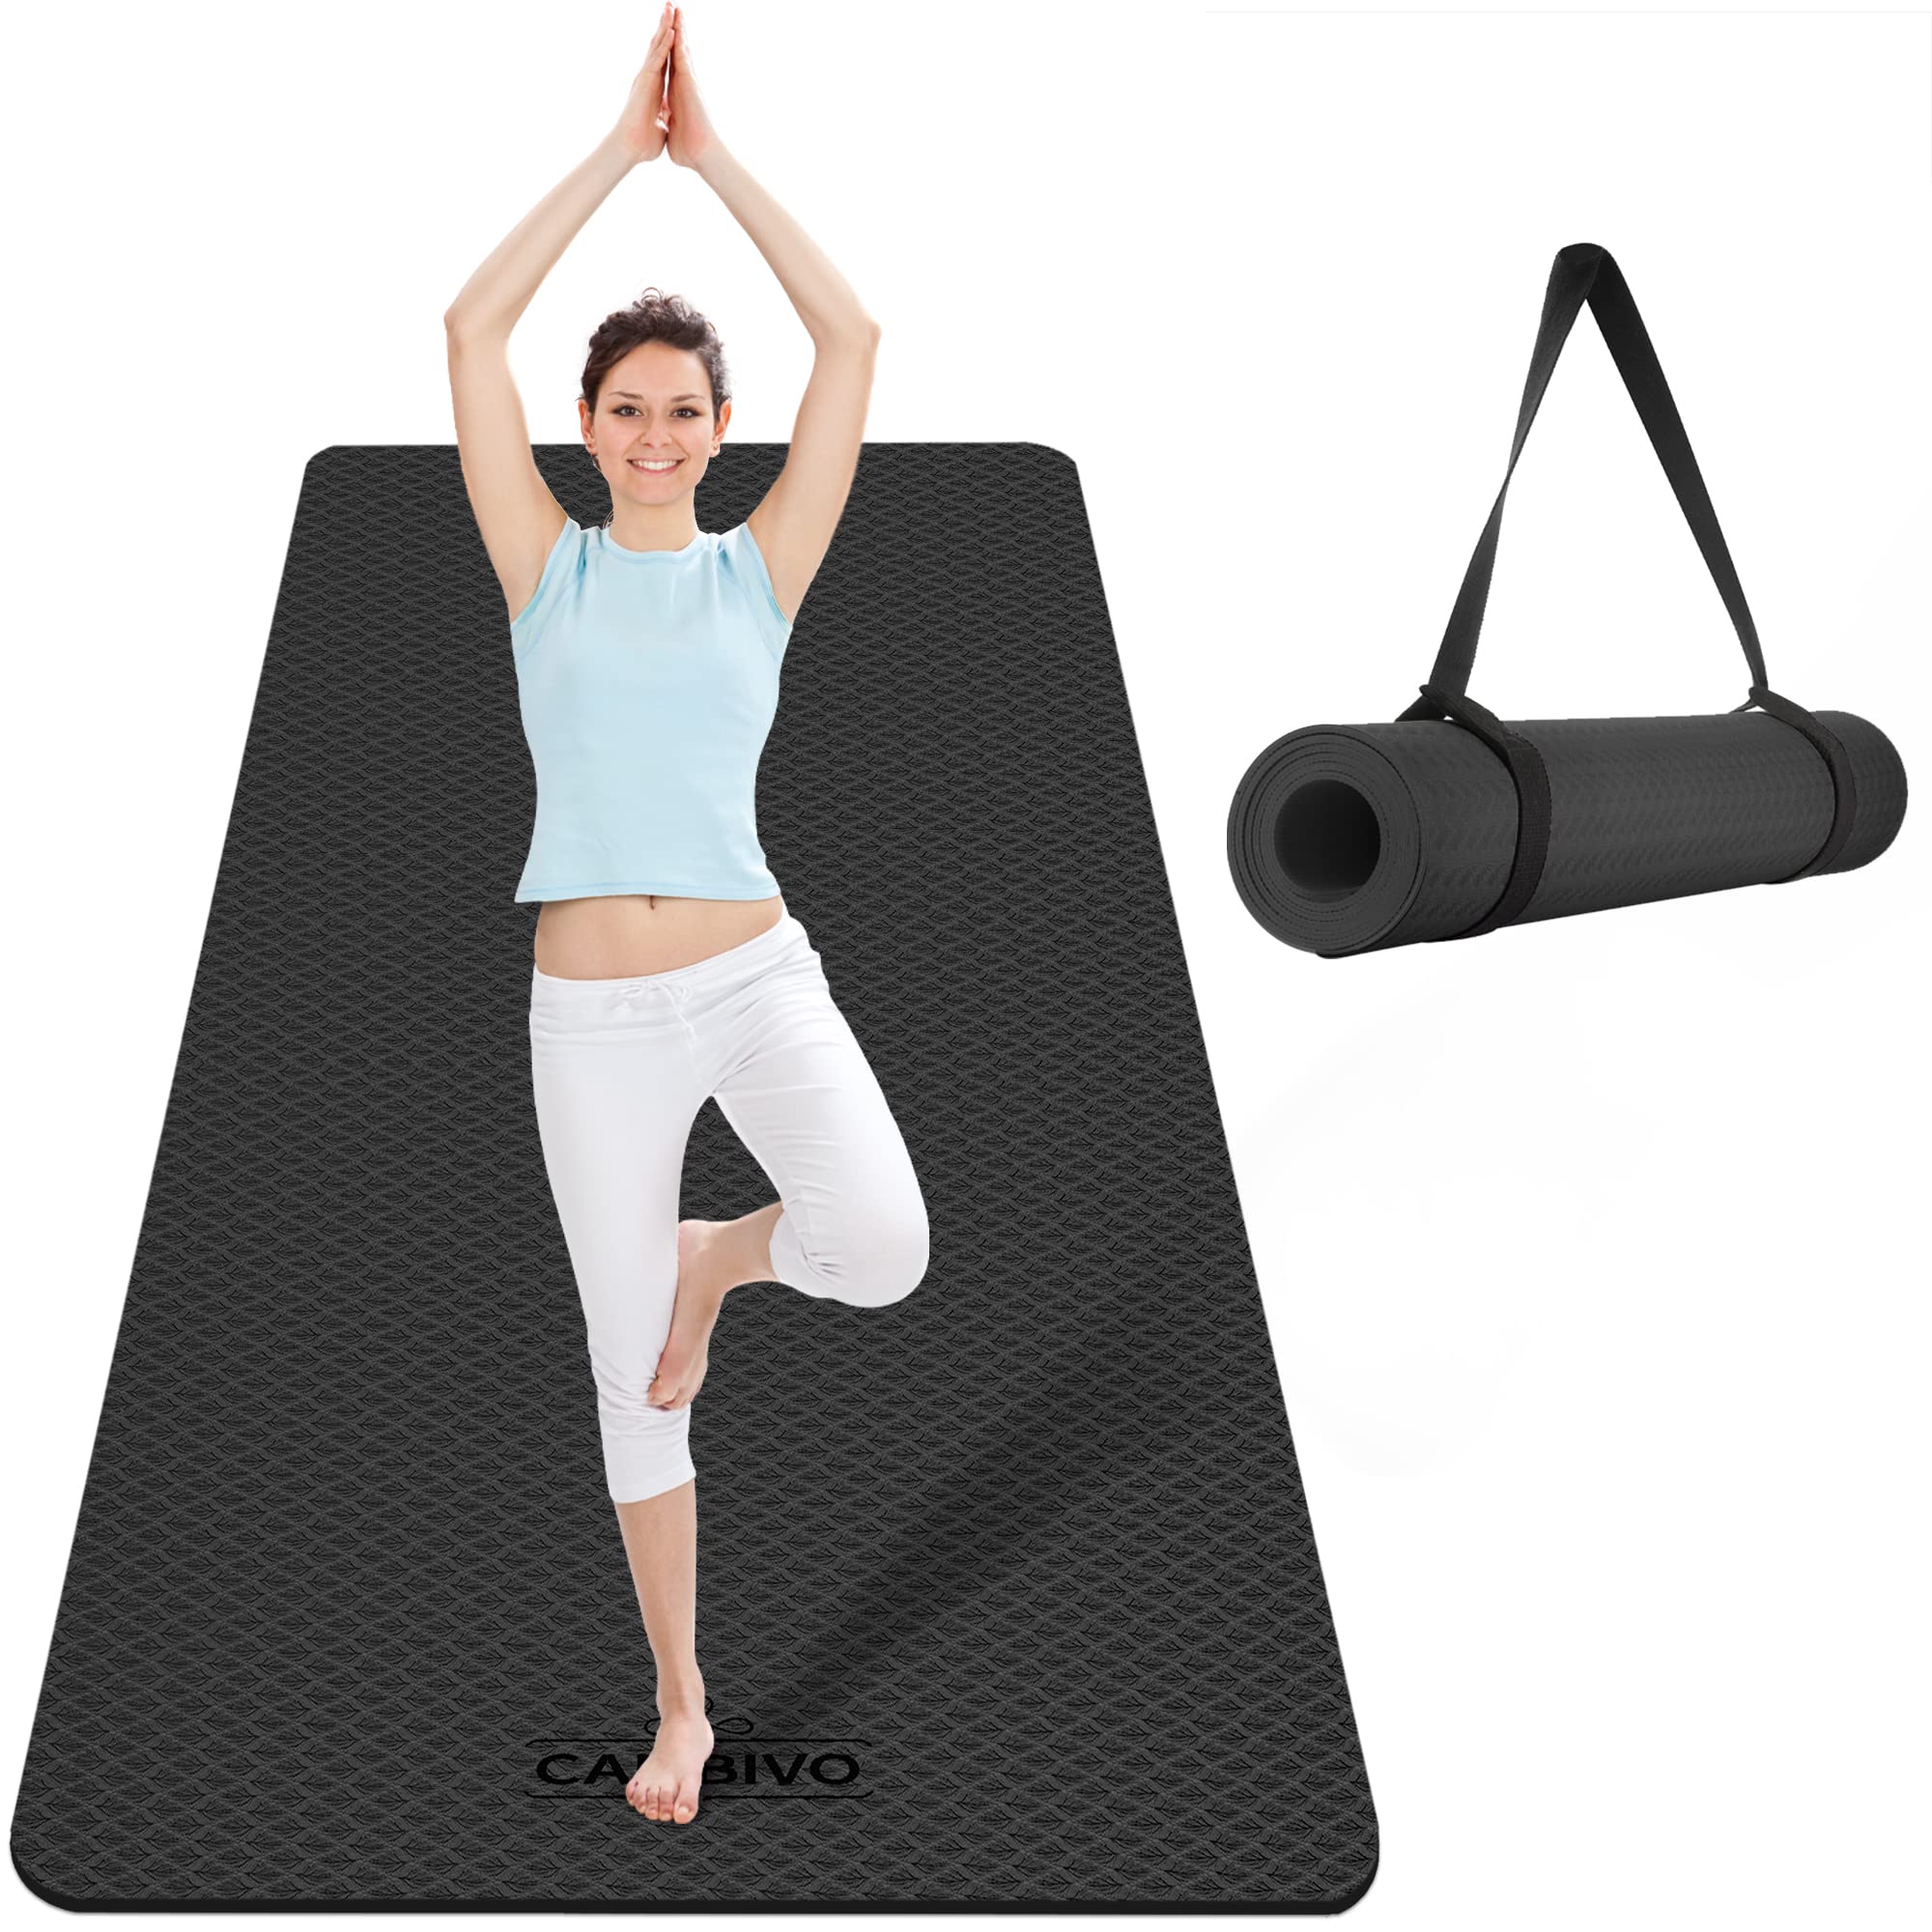 CAMBIVO Extra Wide Yoga Mat for Women and Men (72x 32x 1/4